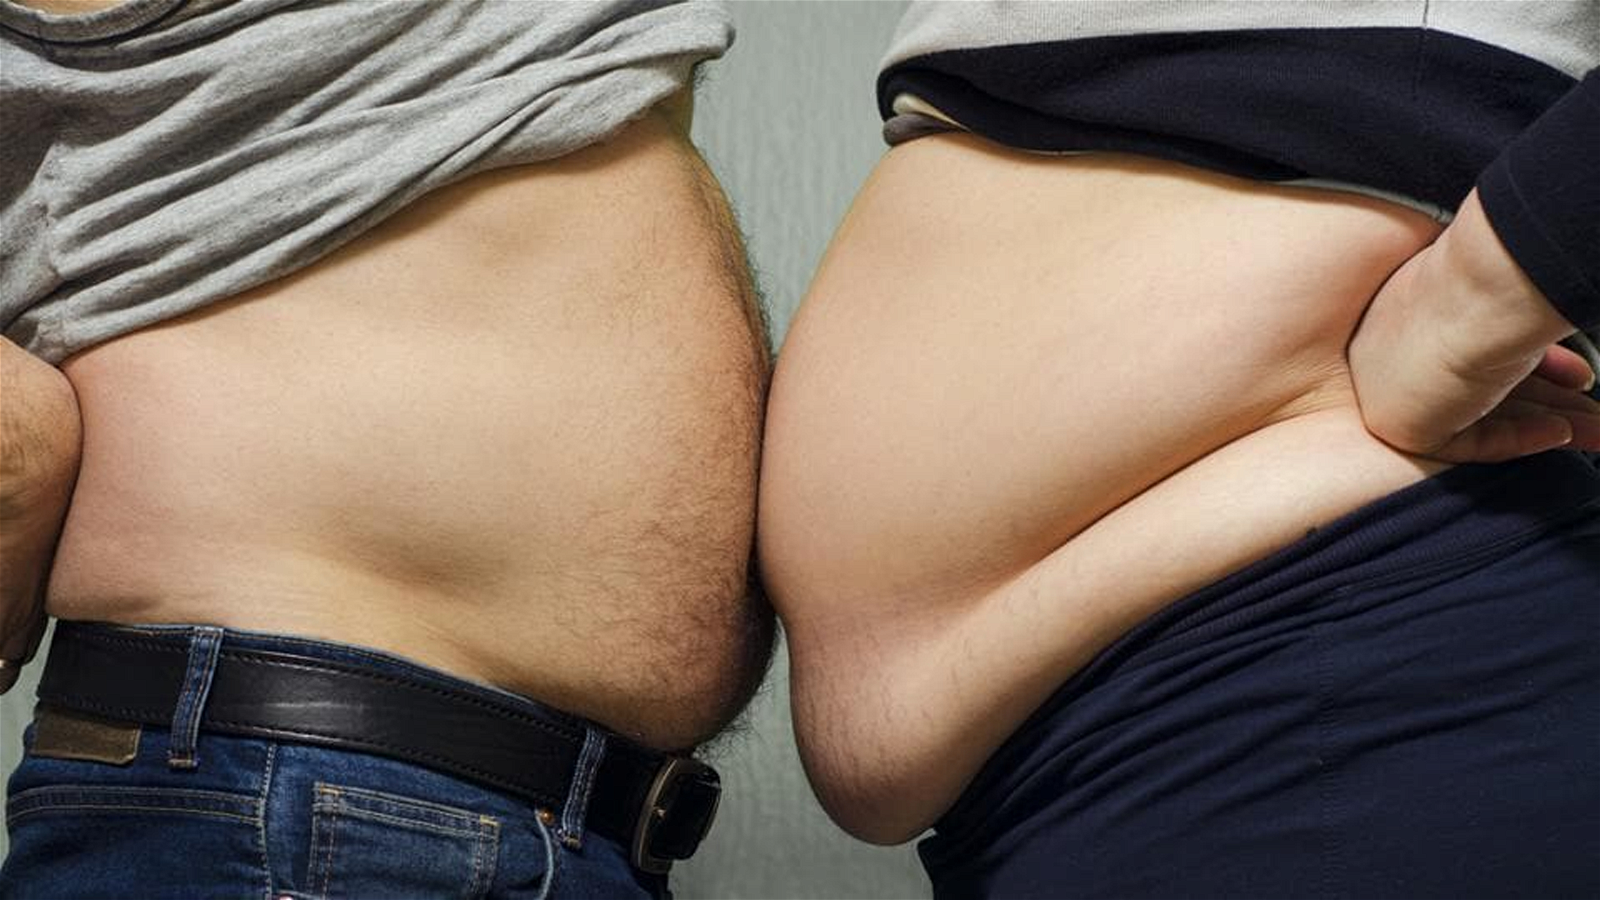 Why some men drool over fat women! - Vanguard News